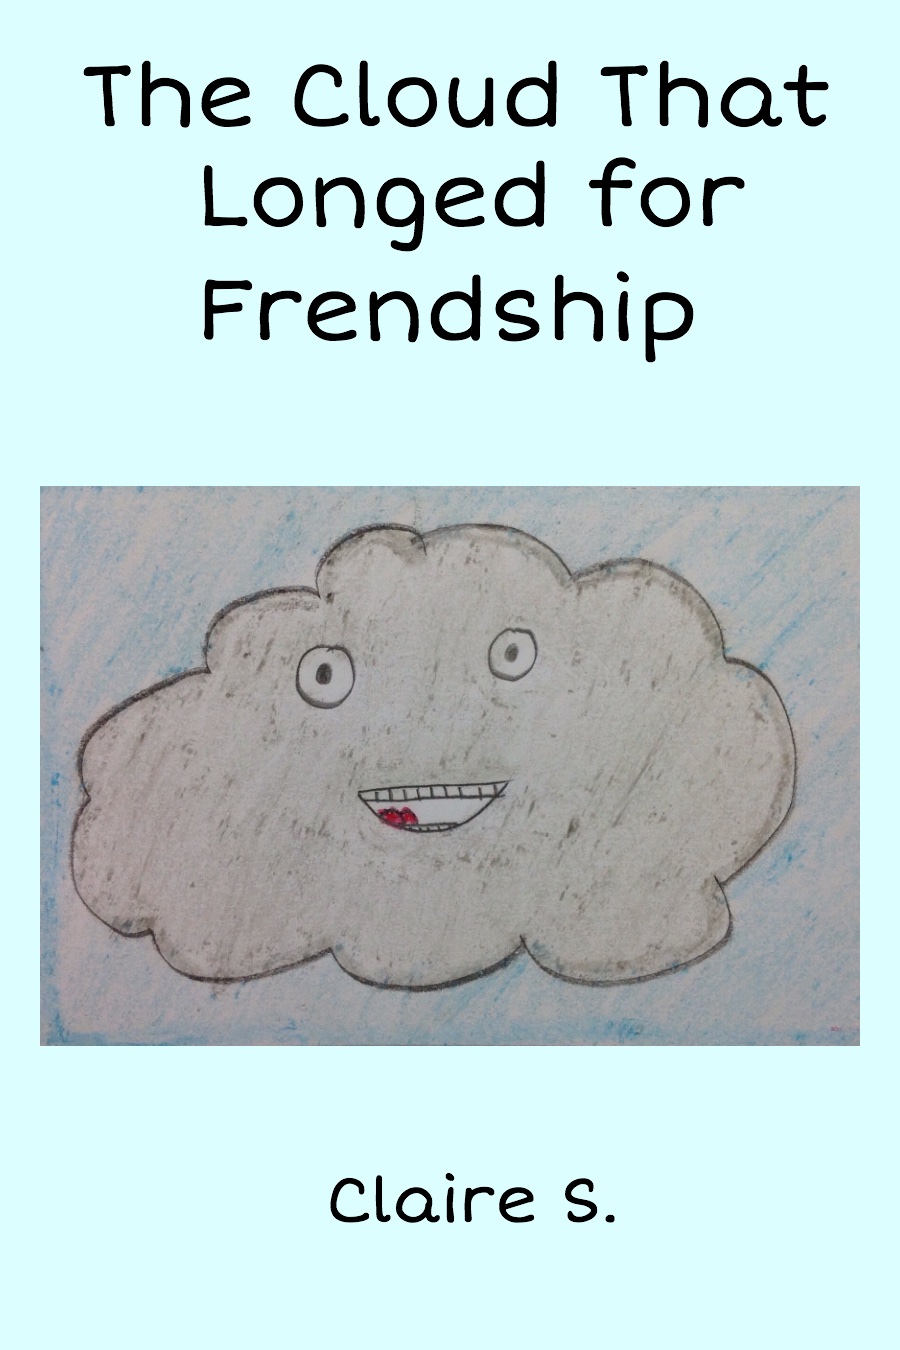 The Cloud That Longed for Friendship by Claire S